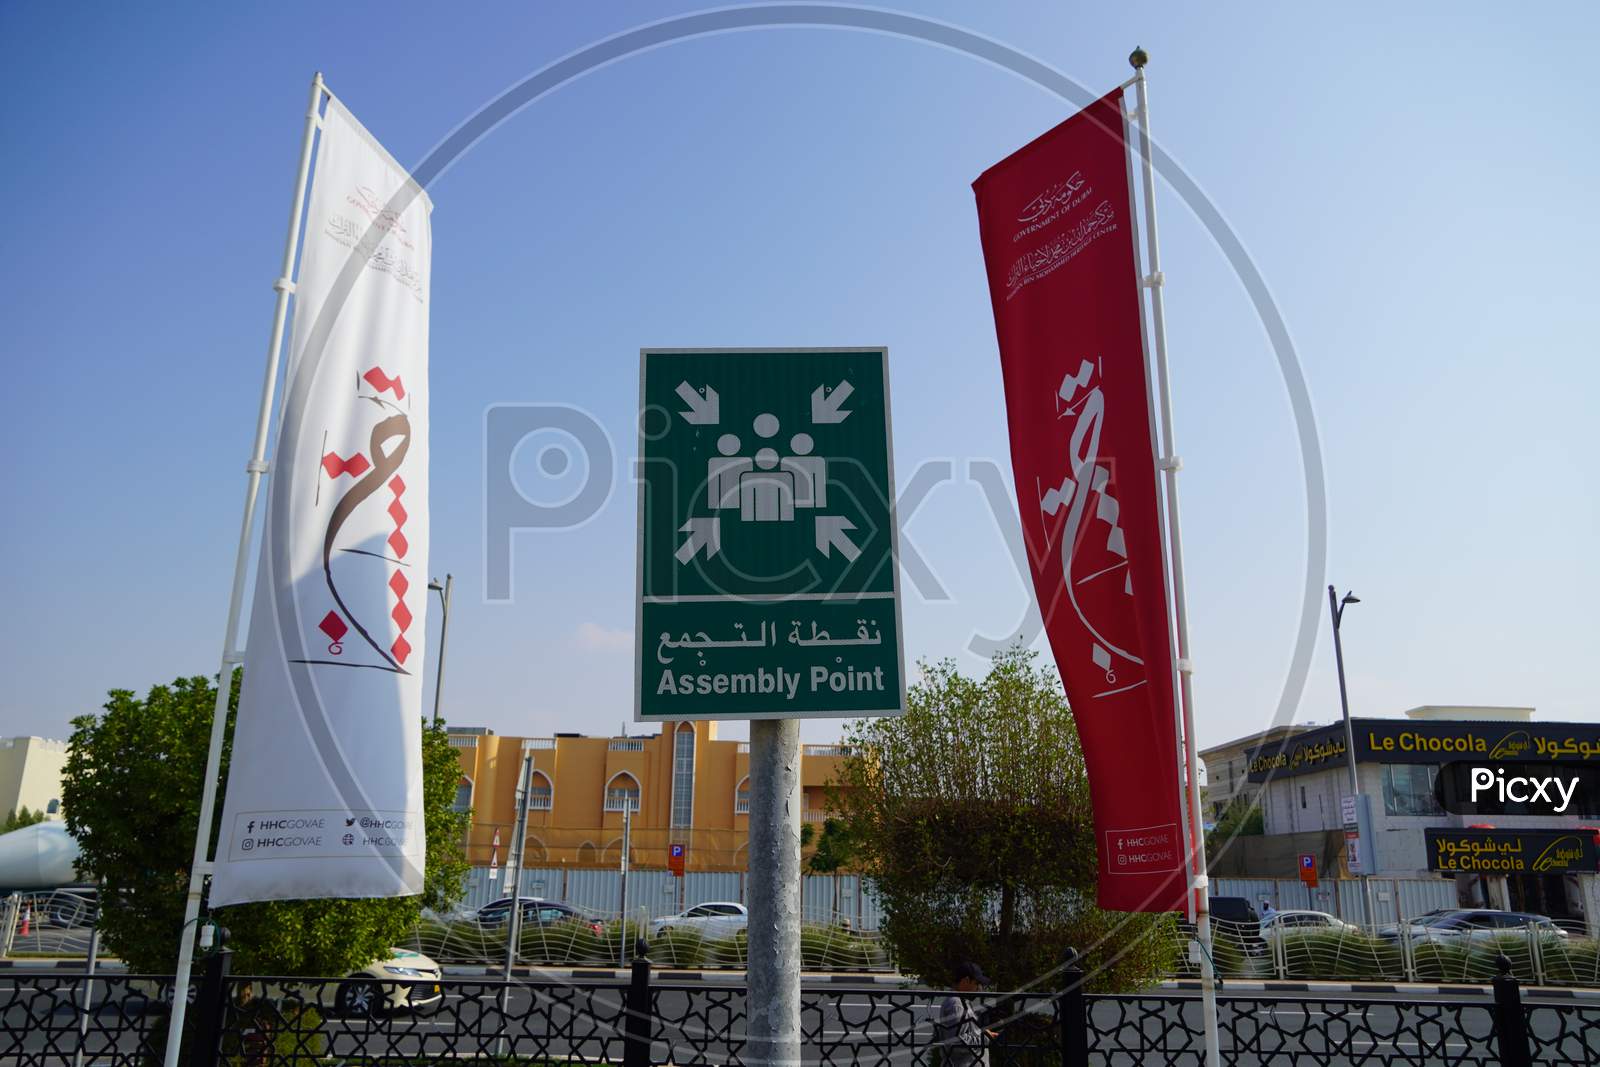 Dubai Uae - November 2019: Emergency Assembly Point Information Sign In White Paint On Green Background Fixed To A Pole To Direct People Where To Go In Case Of An Emergency.